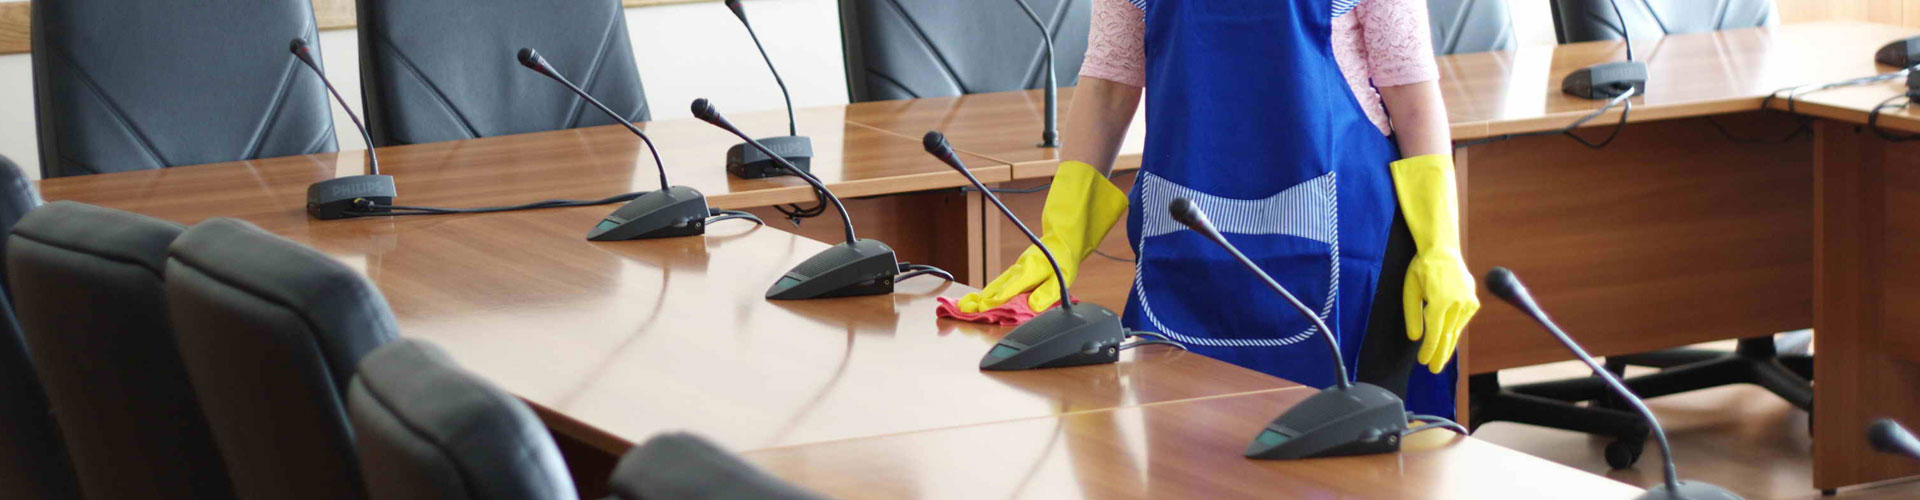 commercial-cleaning-officejpg